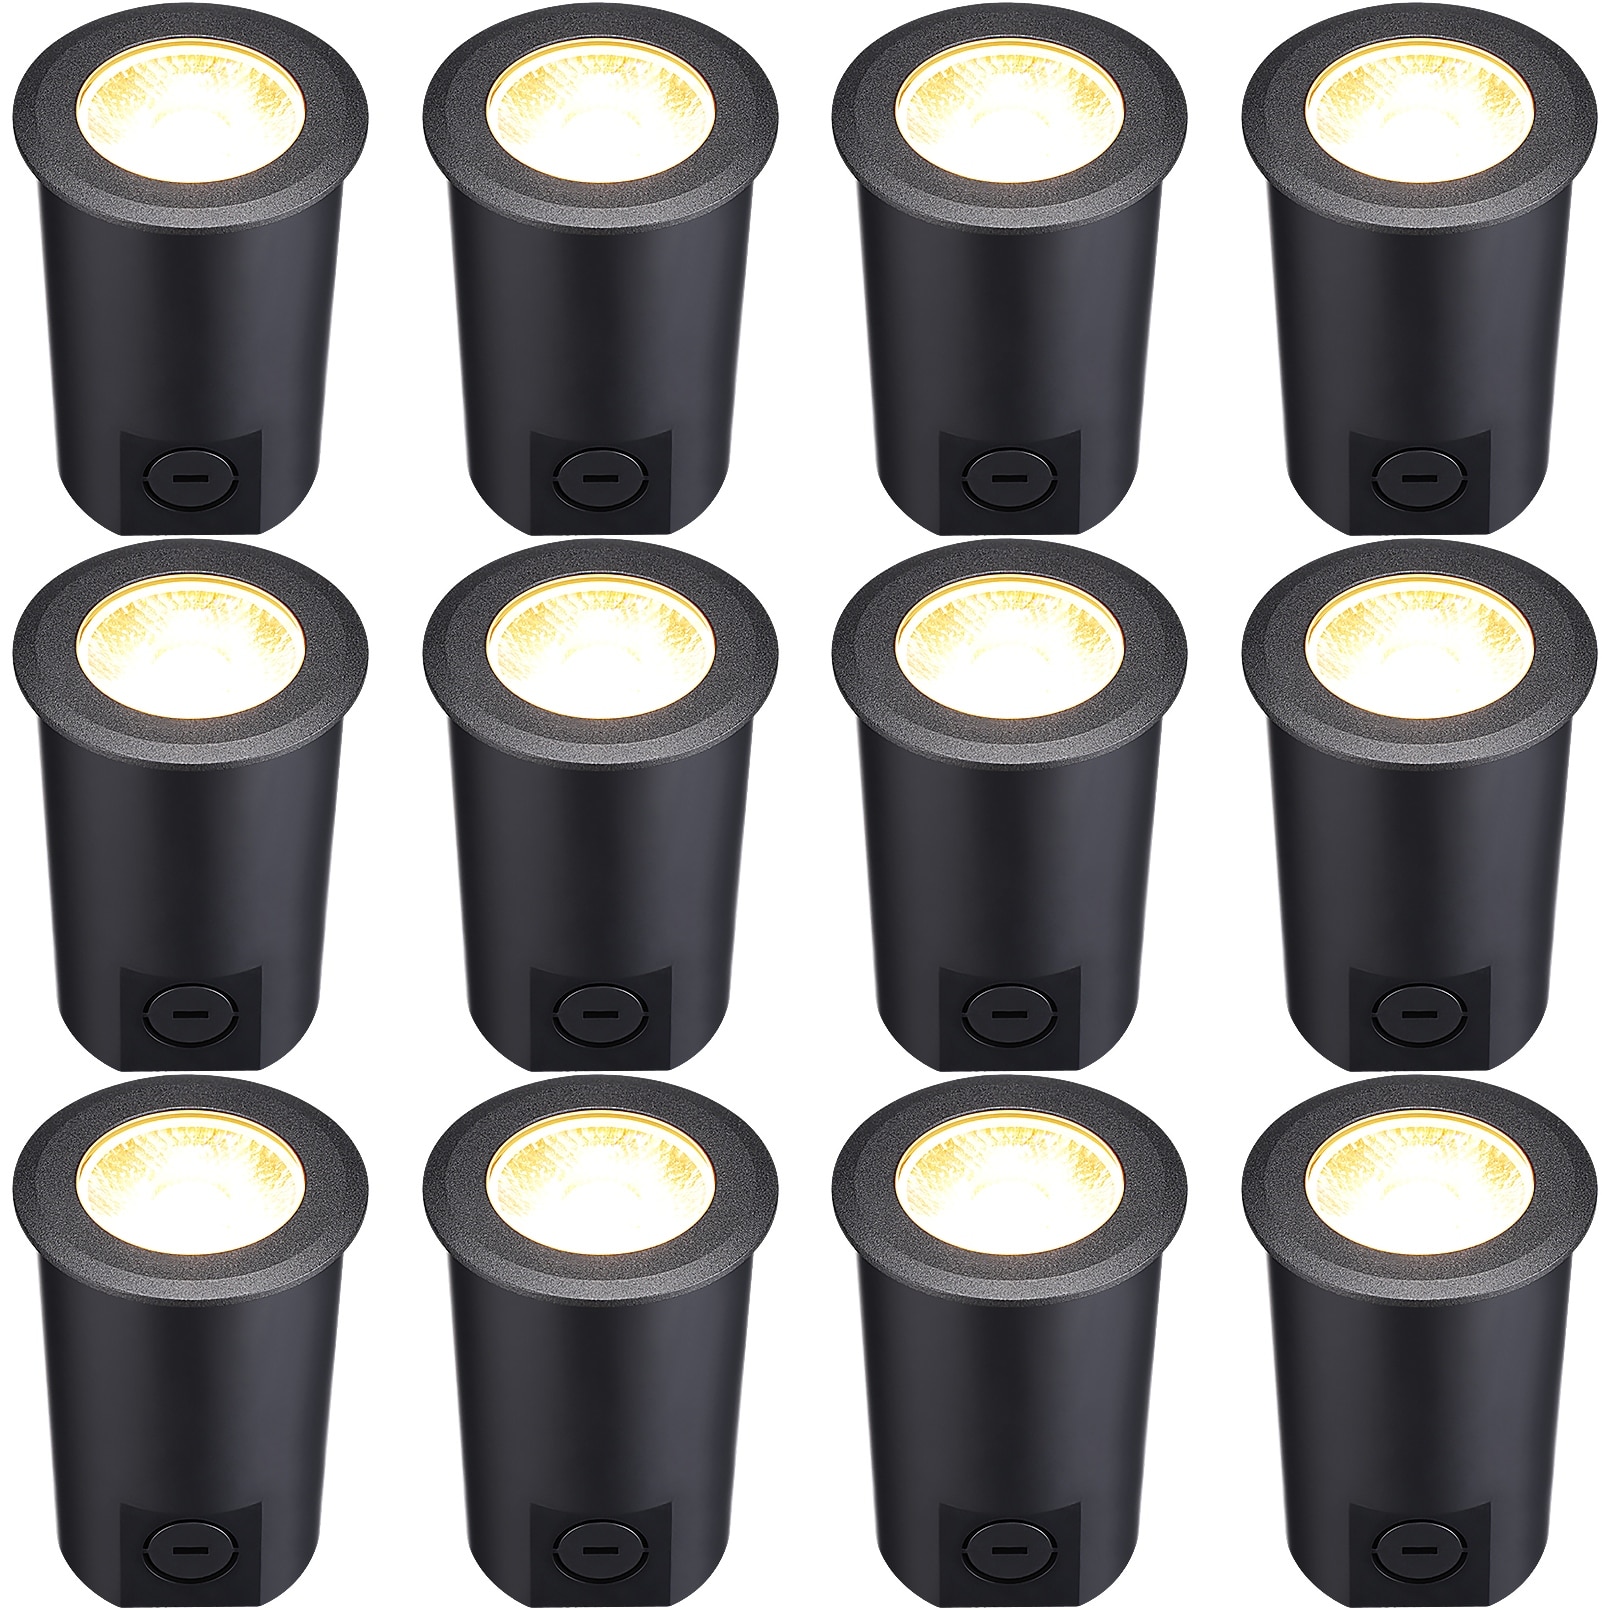 LED Well Lights Landscape In Ground Low Voltage CRI90 3000K Warm White, IP67  Waterproof 12PACK On Sale Bed Bath  Beyond 33966050